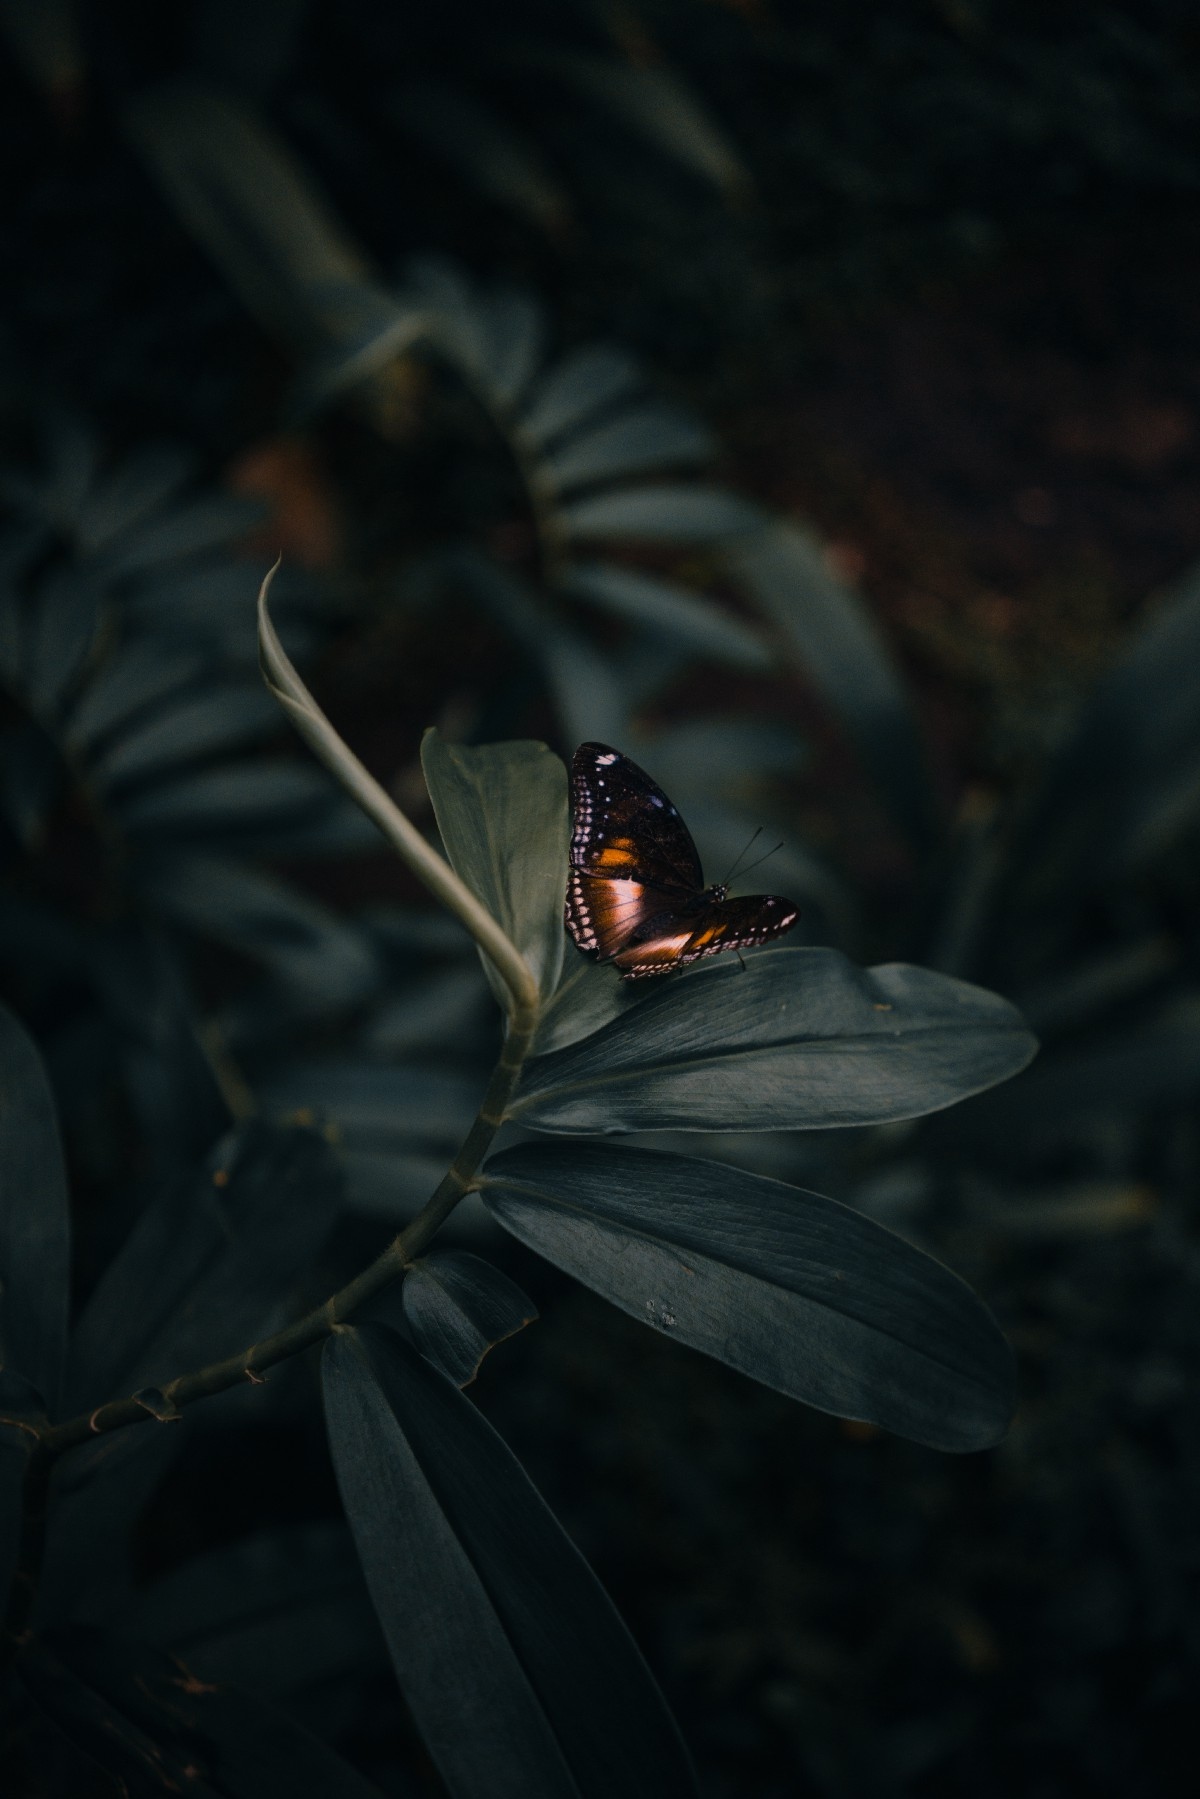 A butterfly on a leaf in a dark forest. - Butterfly